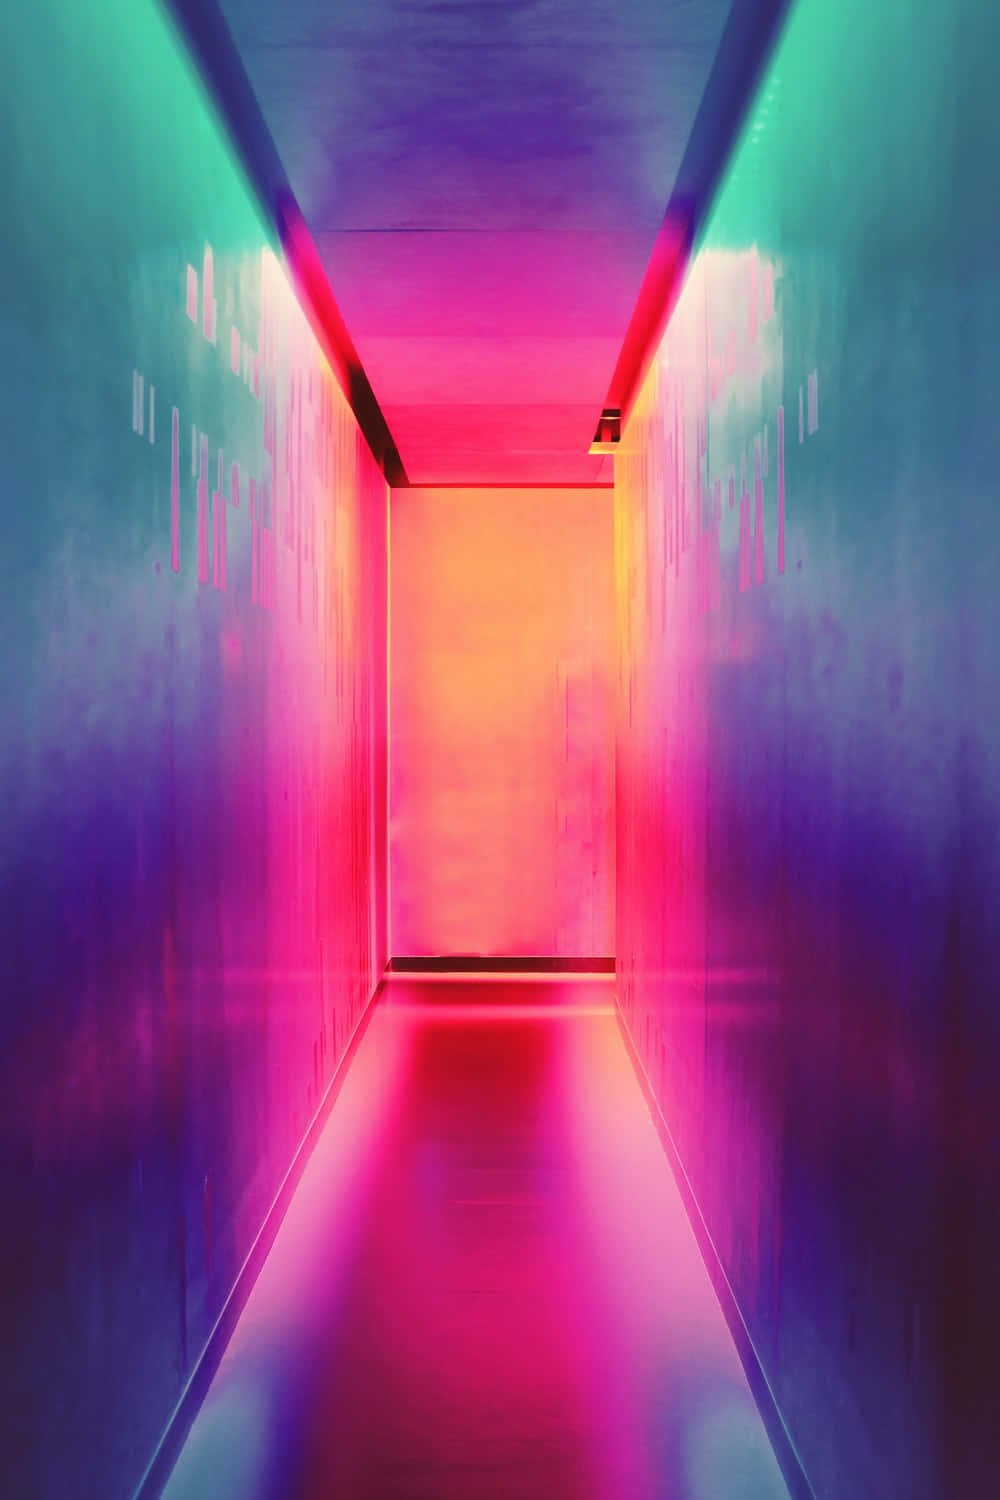 “Plunge into vibrant neon with the iPhone”